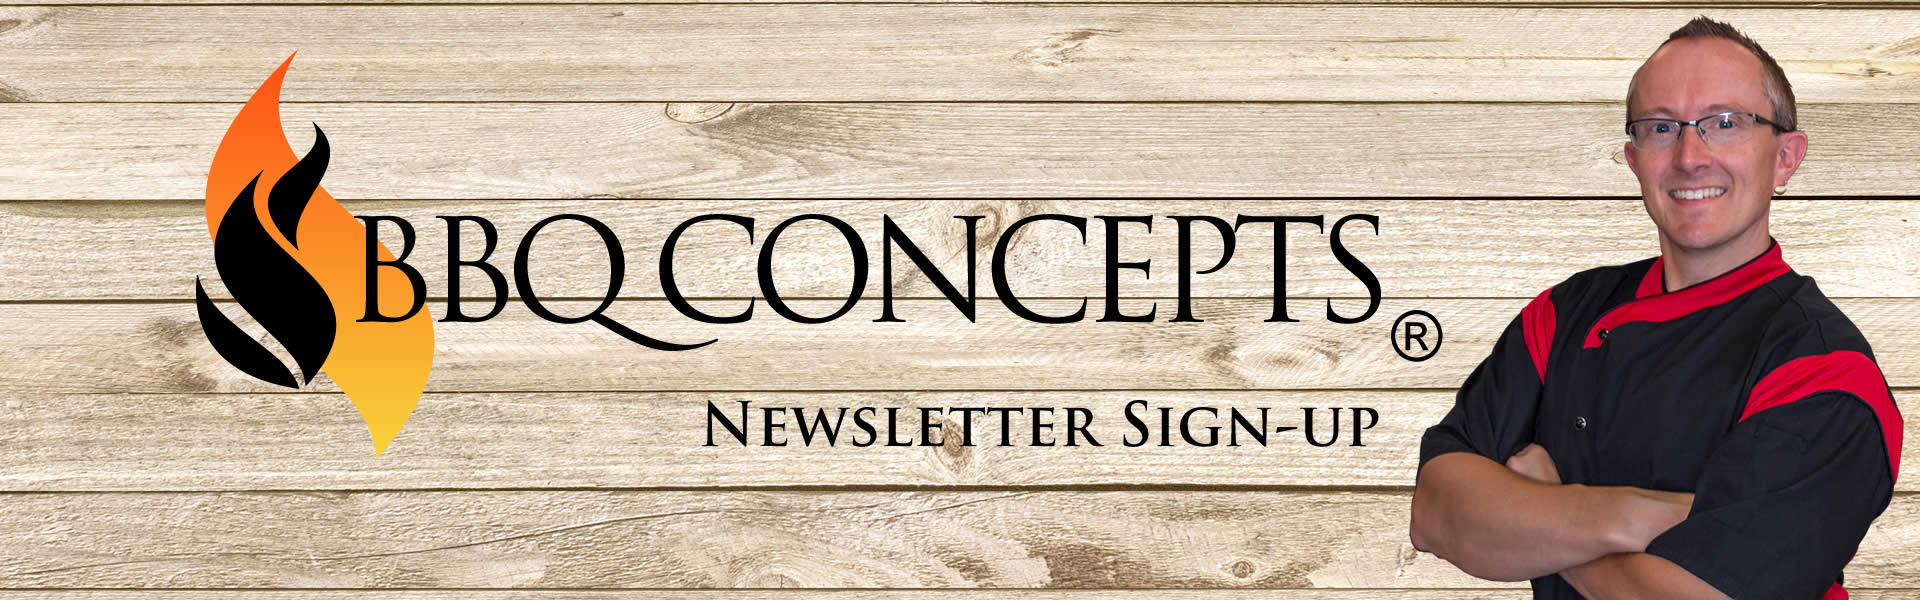 BBQ Concepts Newsletter Sign-up